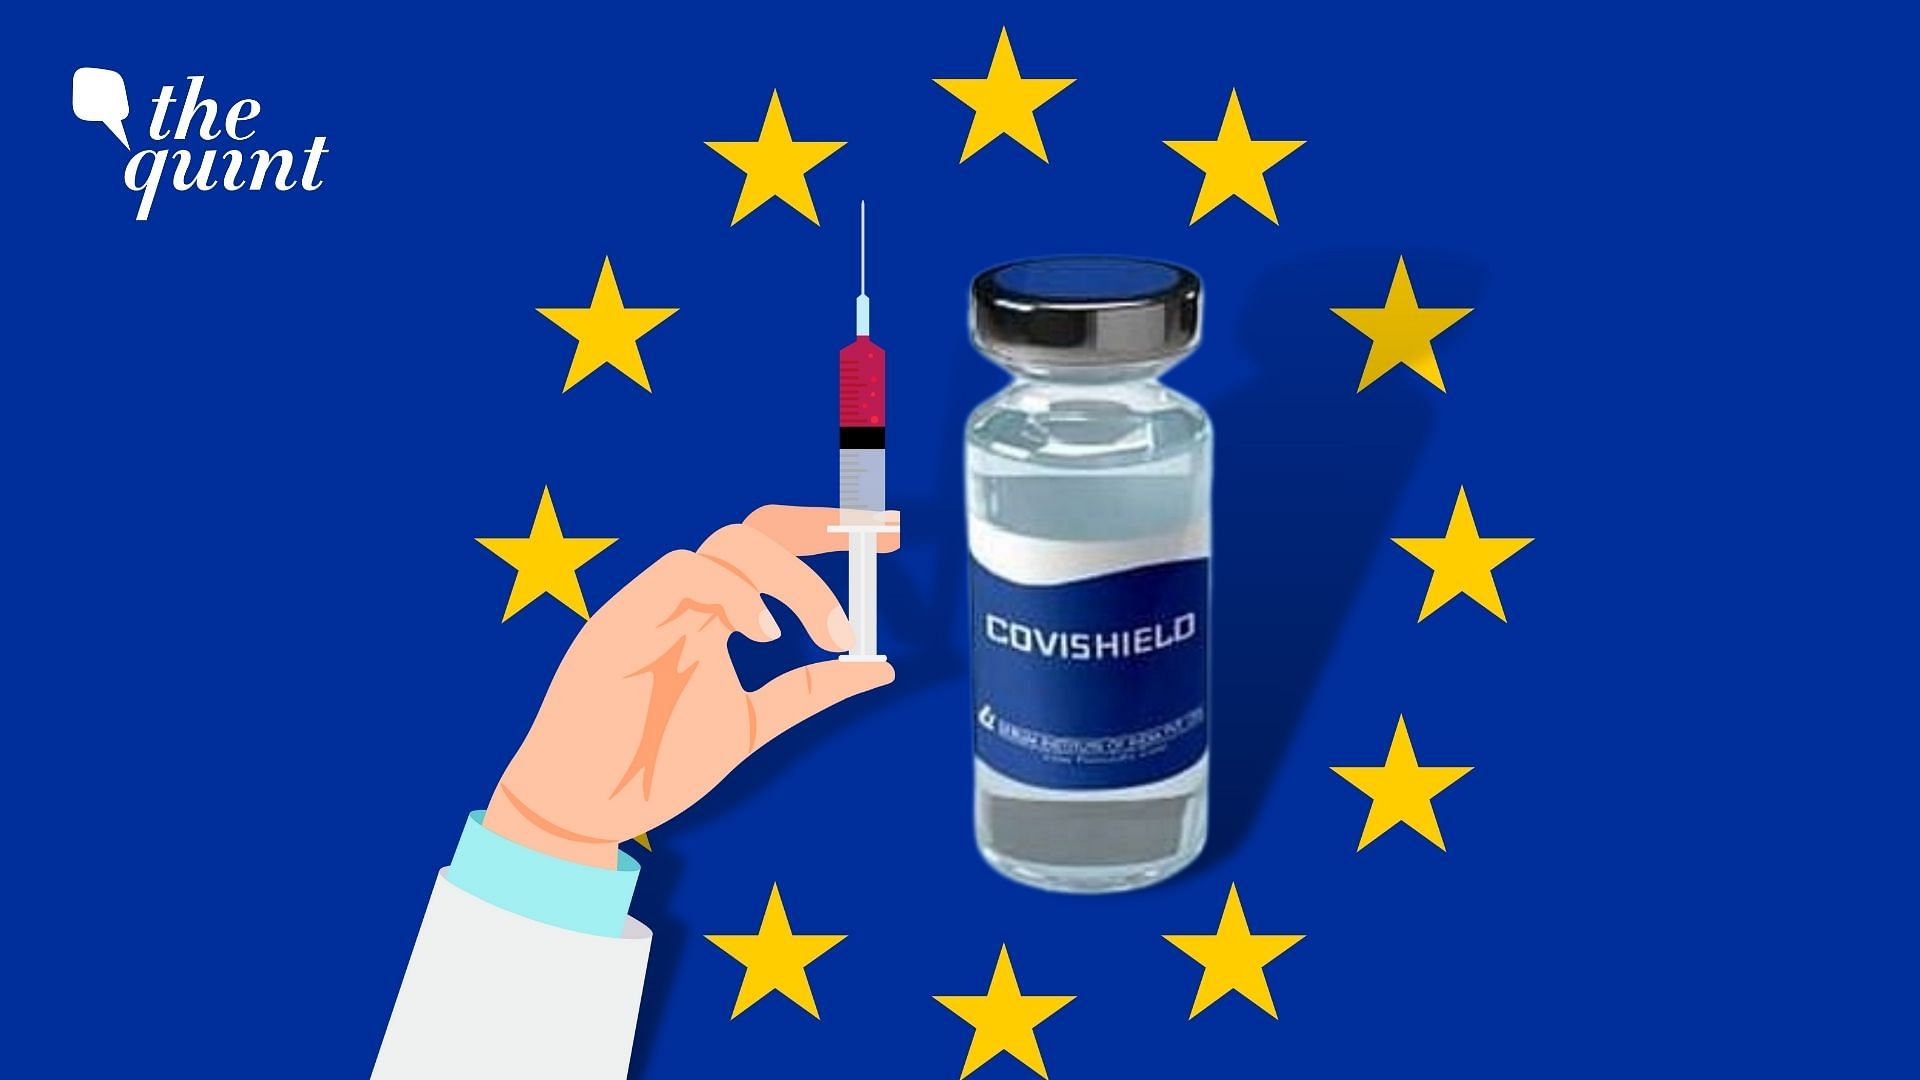 <div class="paragraphs"><p>The European Medicines Agency (EMA) has not received any request for approval of authorisation of Covishield, reported ANI, on Tuesday, 29 June, citing a European Union (EU) official.</p></div><div class="paragraphs"><p><br></p></div>